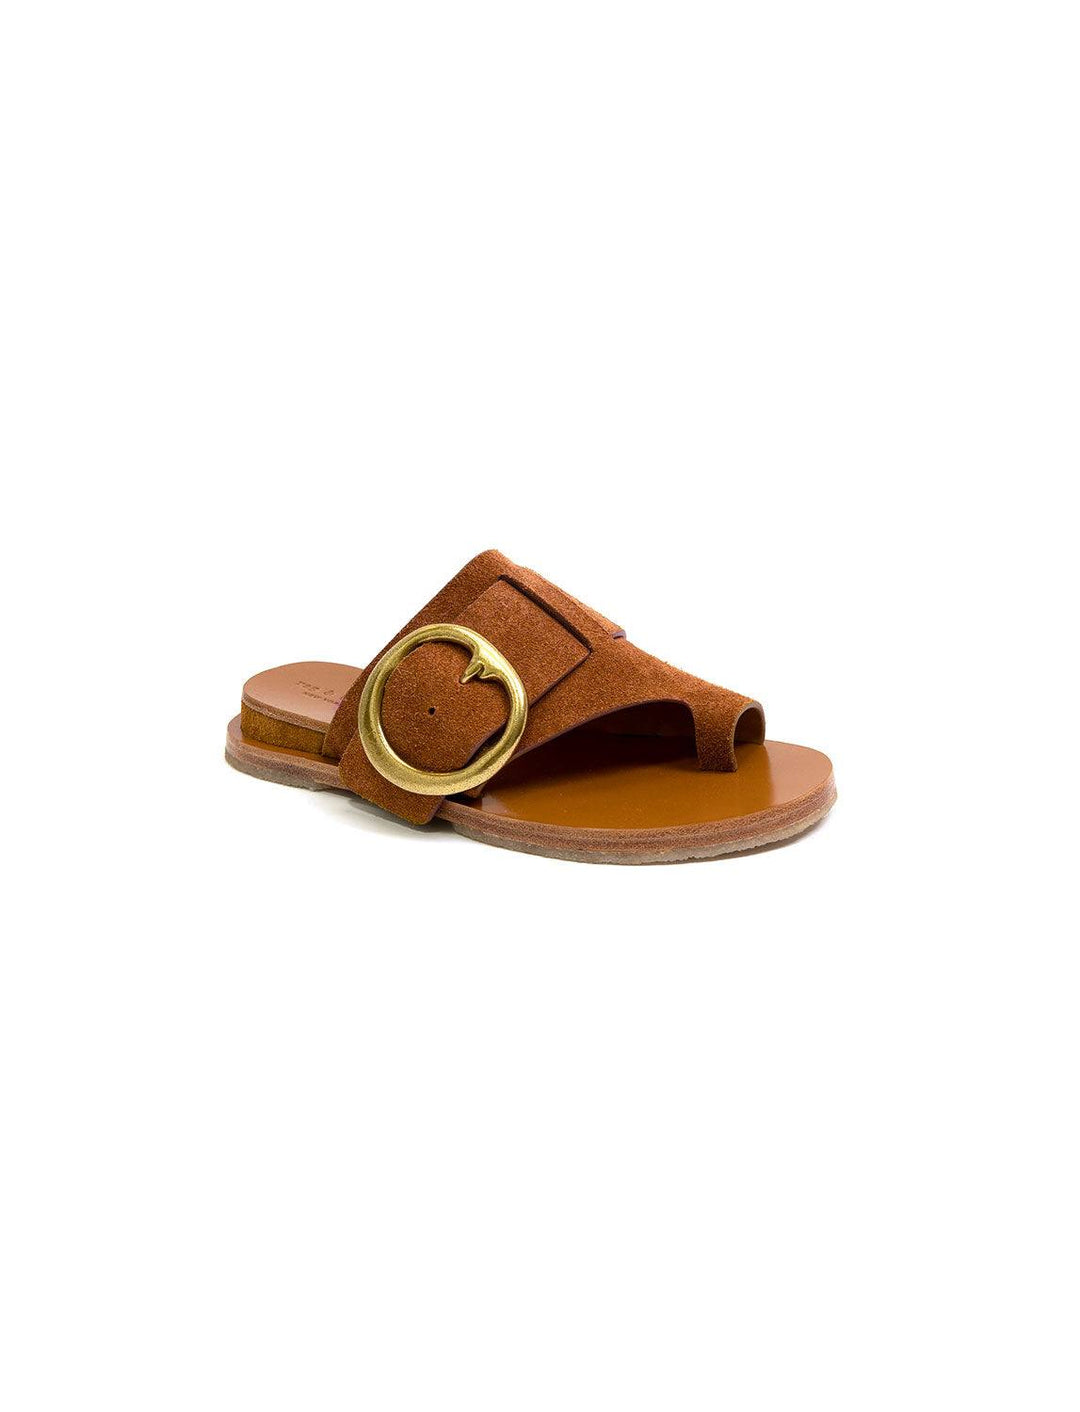 Front angle view of Rag & Bone's beau buckle slide in tobacco suede.